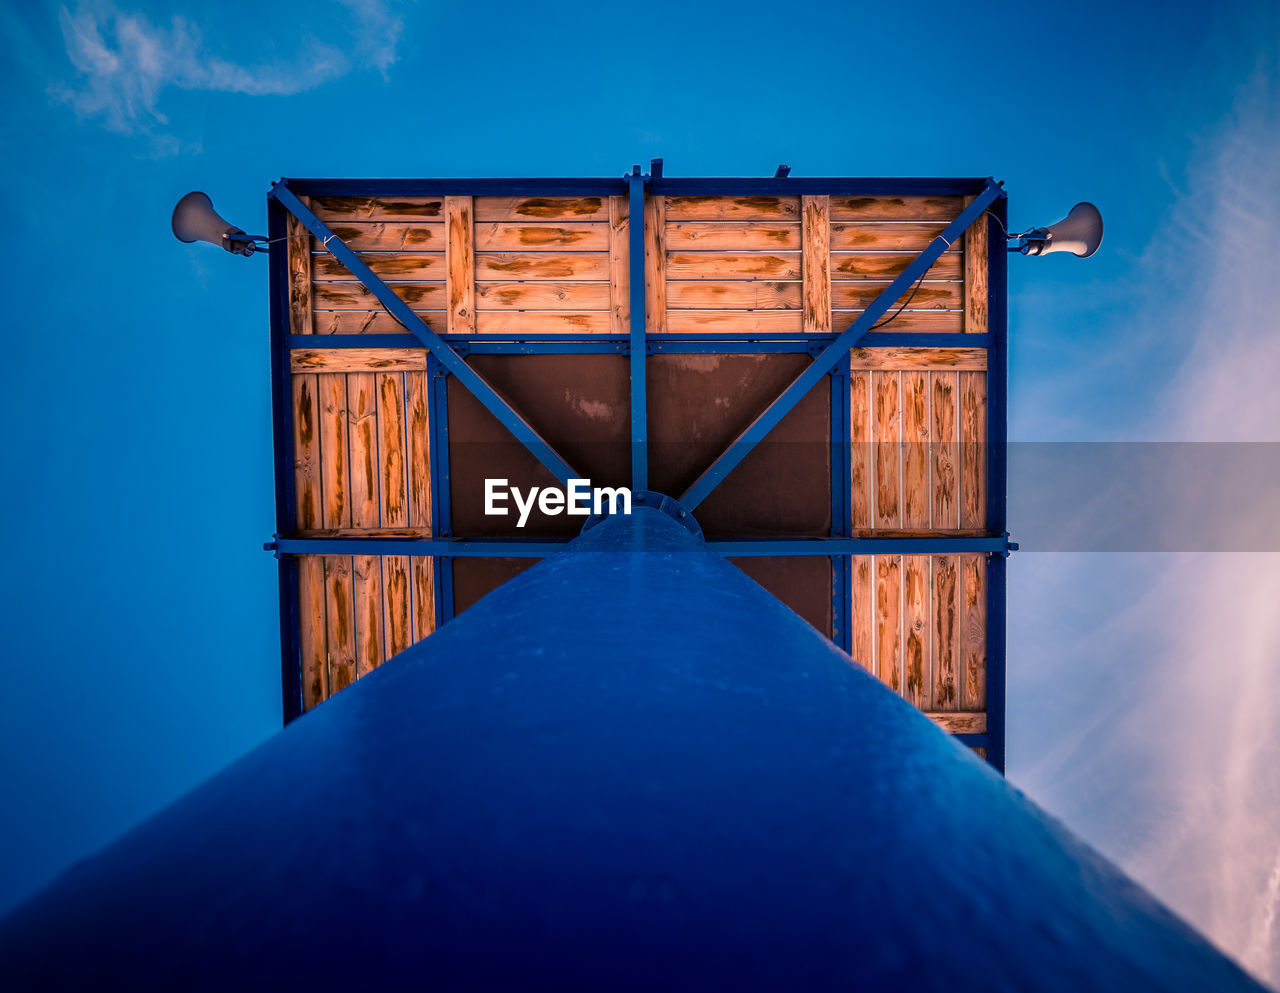 Close-up of wooden structure against blue sky